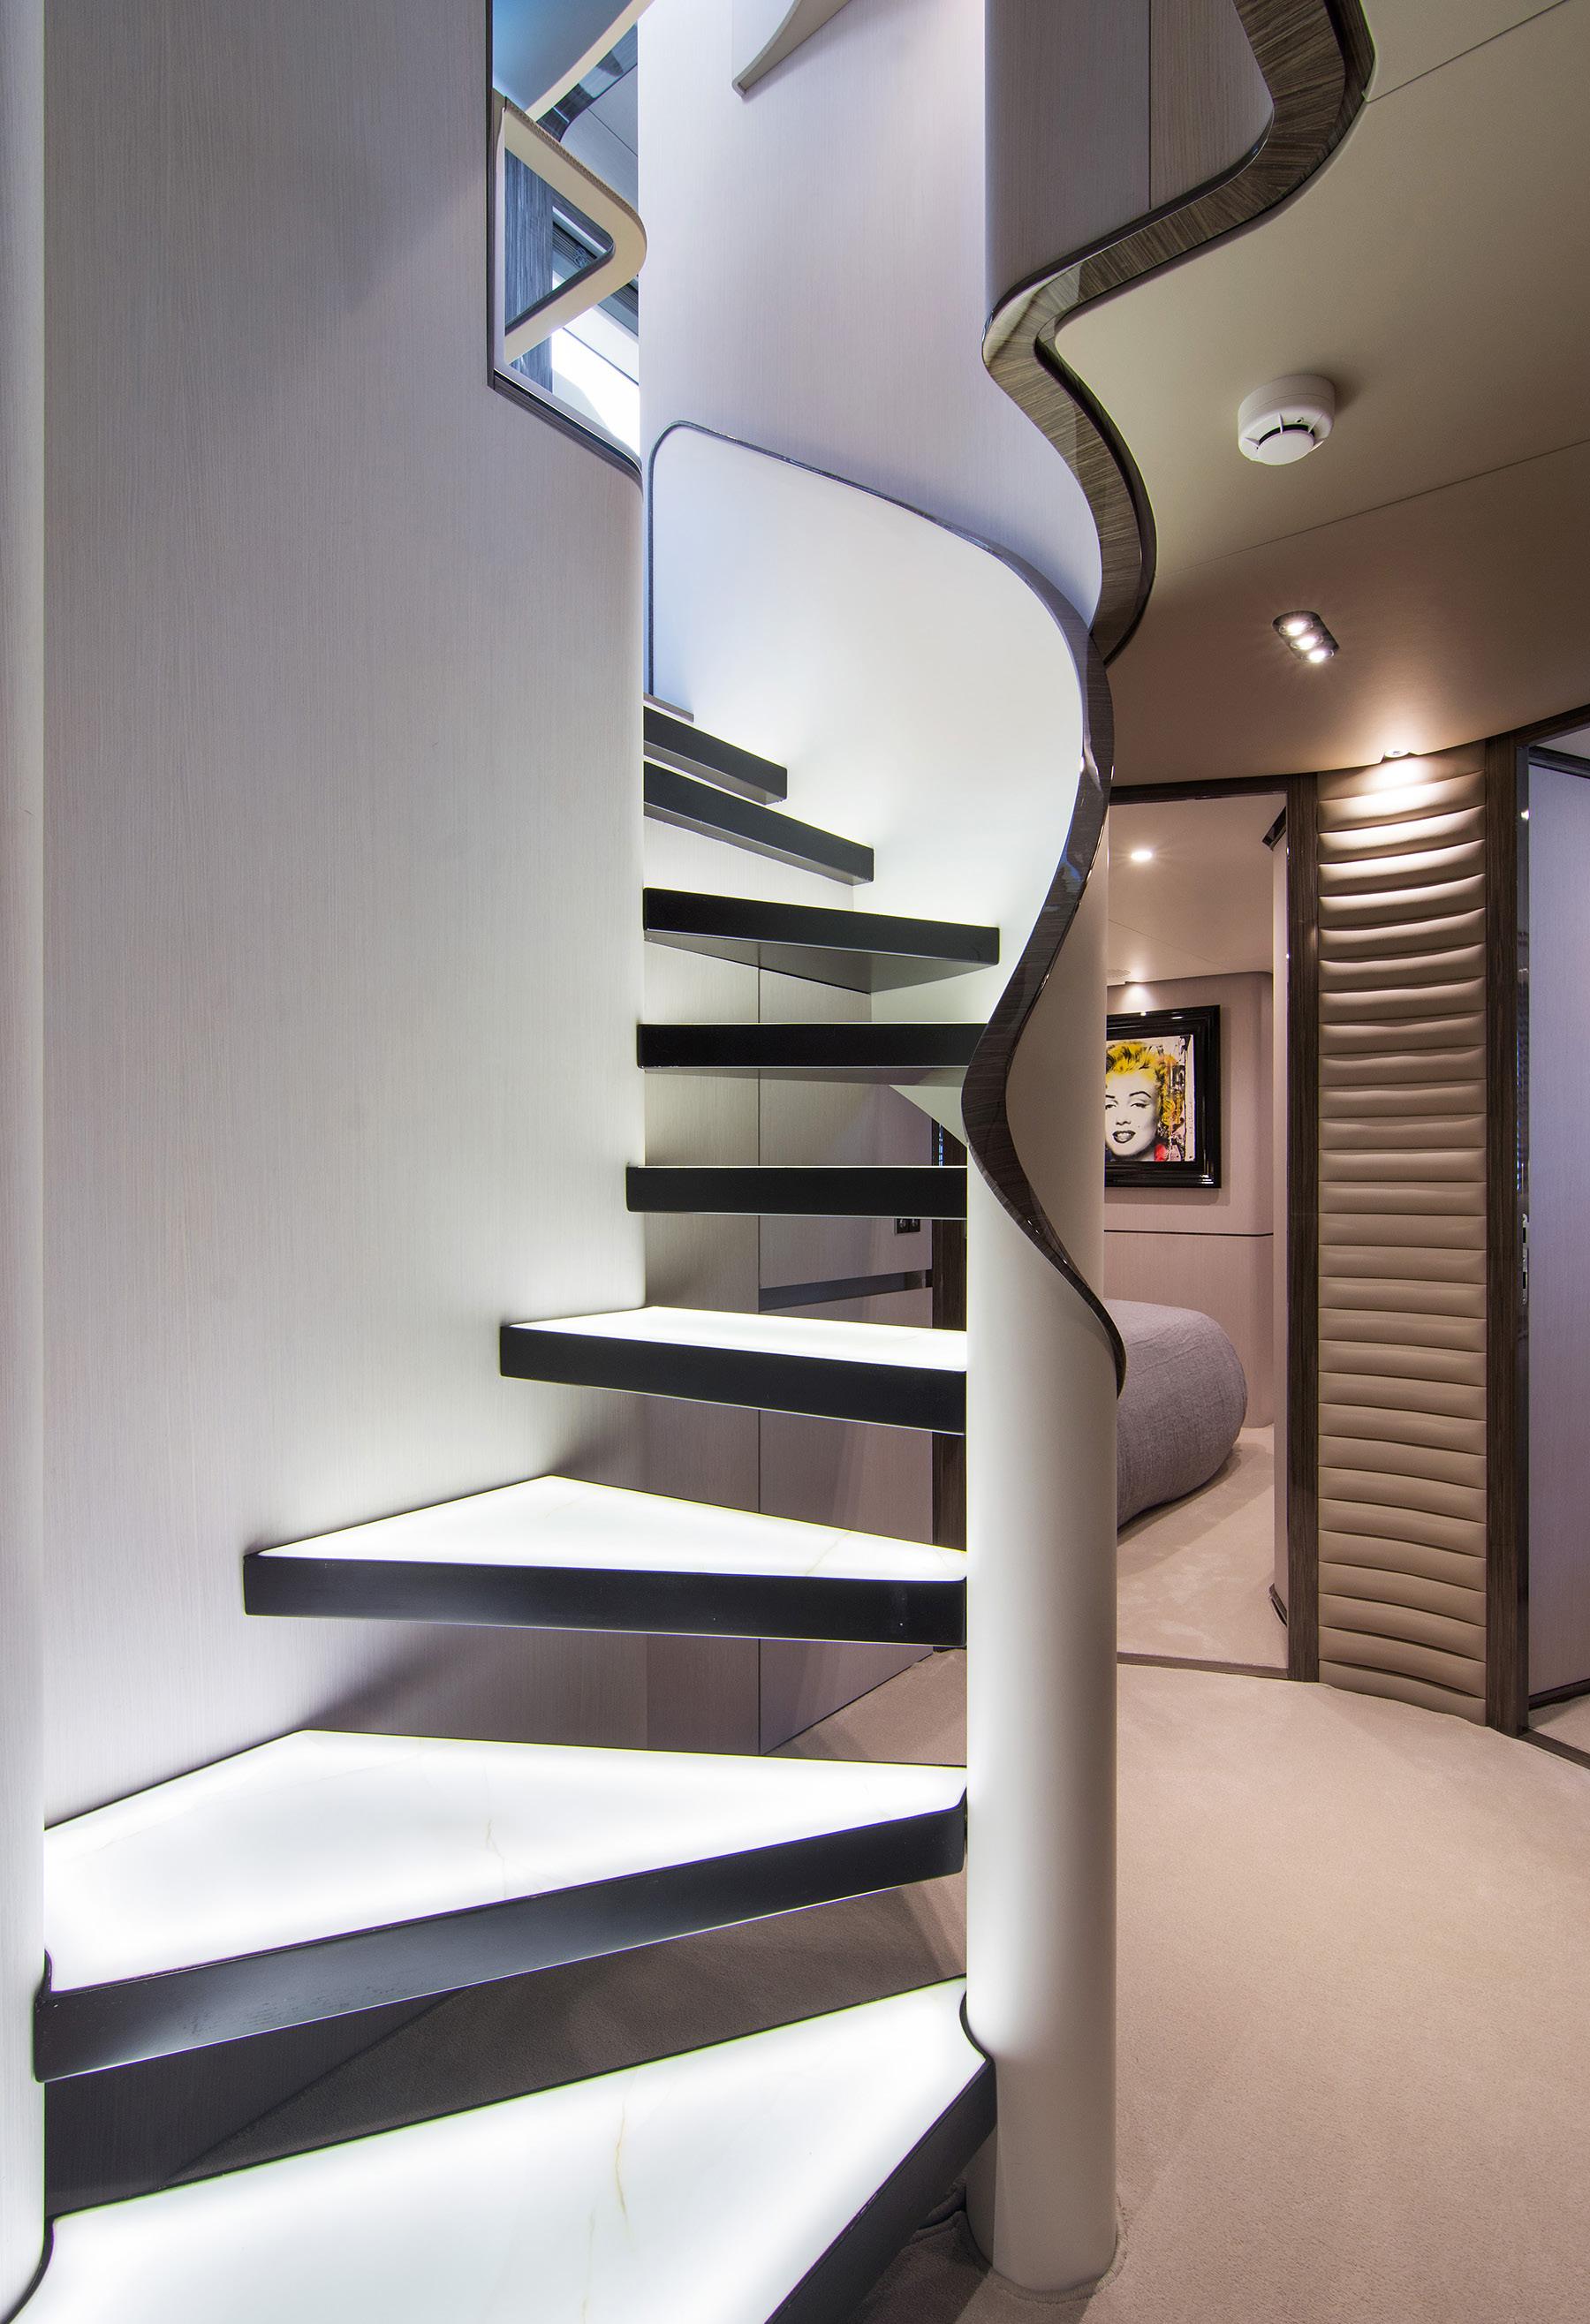 Stairwell To Accommodation